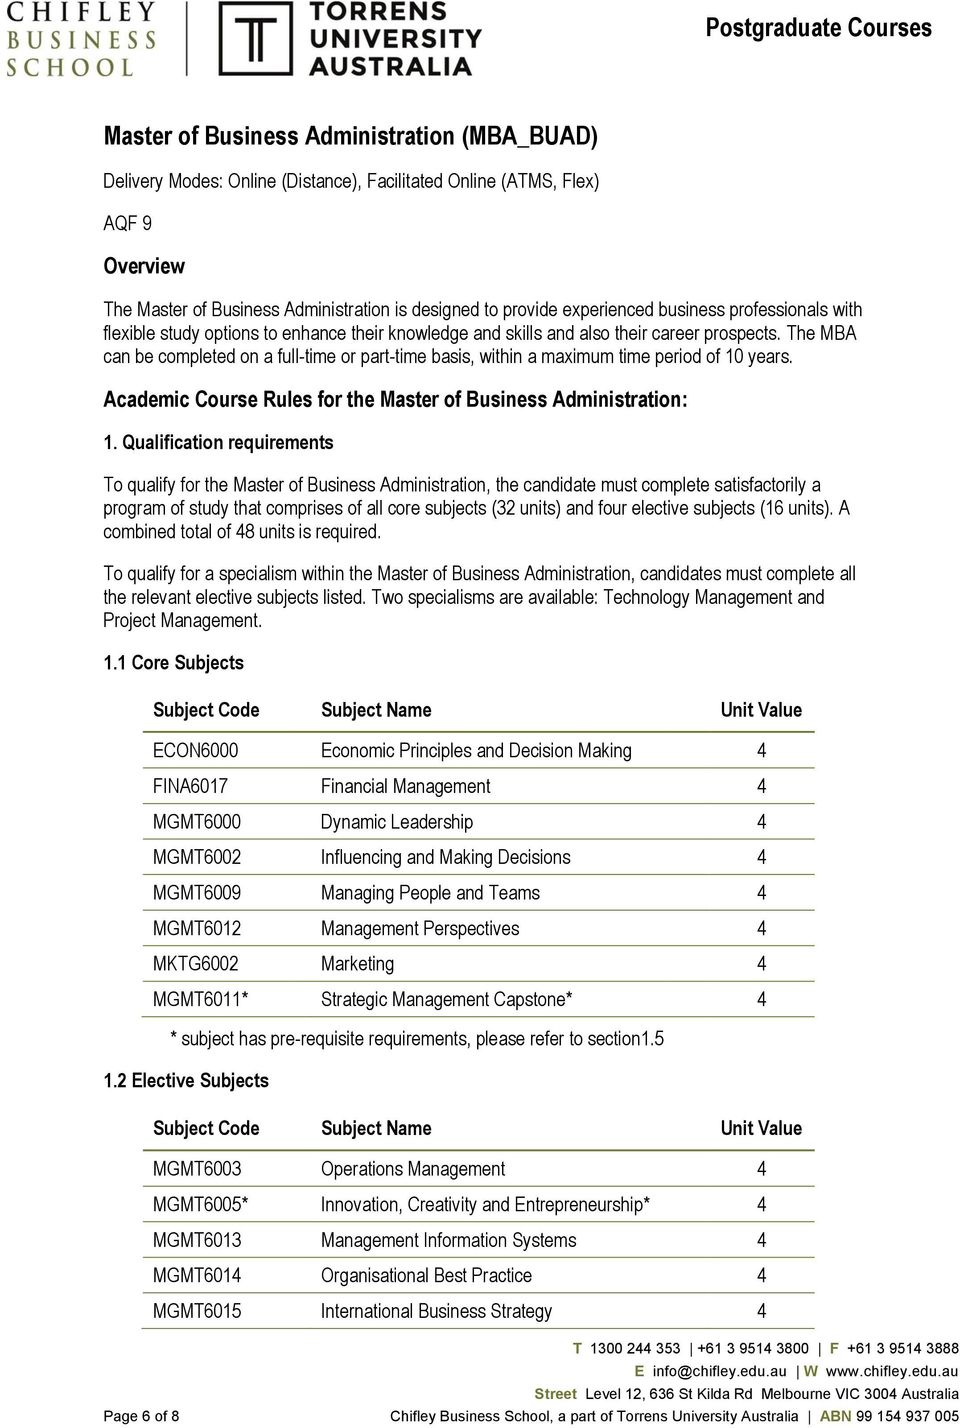 The MBA can be completed on a full-time or part-time basis, within a maximum time period of 10 years. Academic Course Rules for the Master of Business Administration: 1.